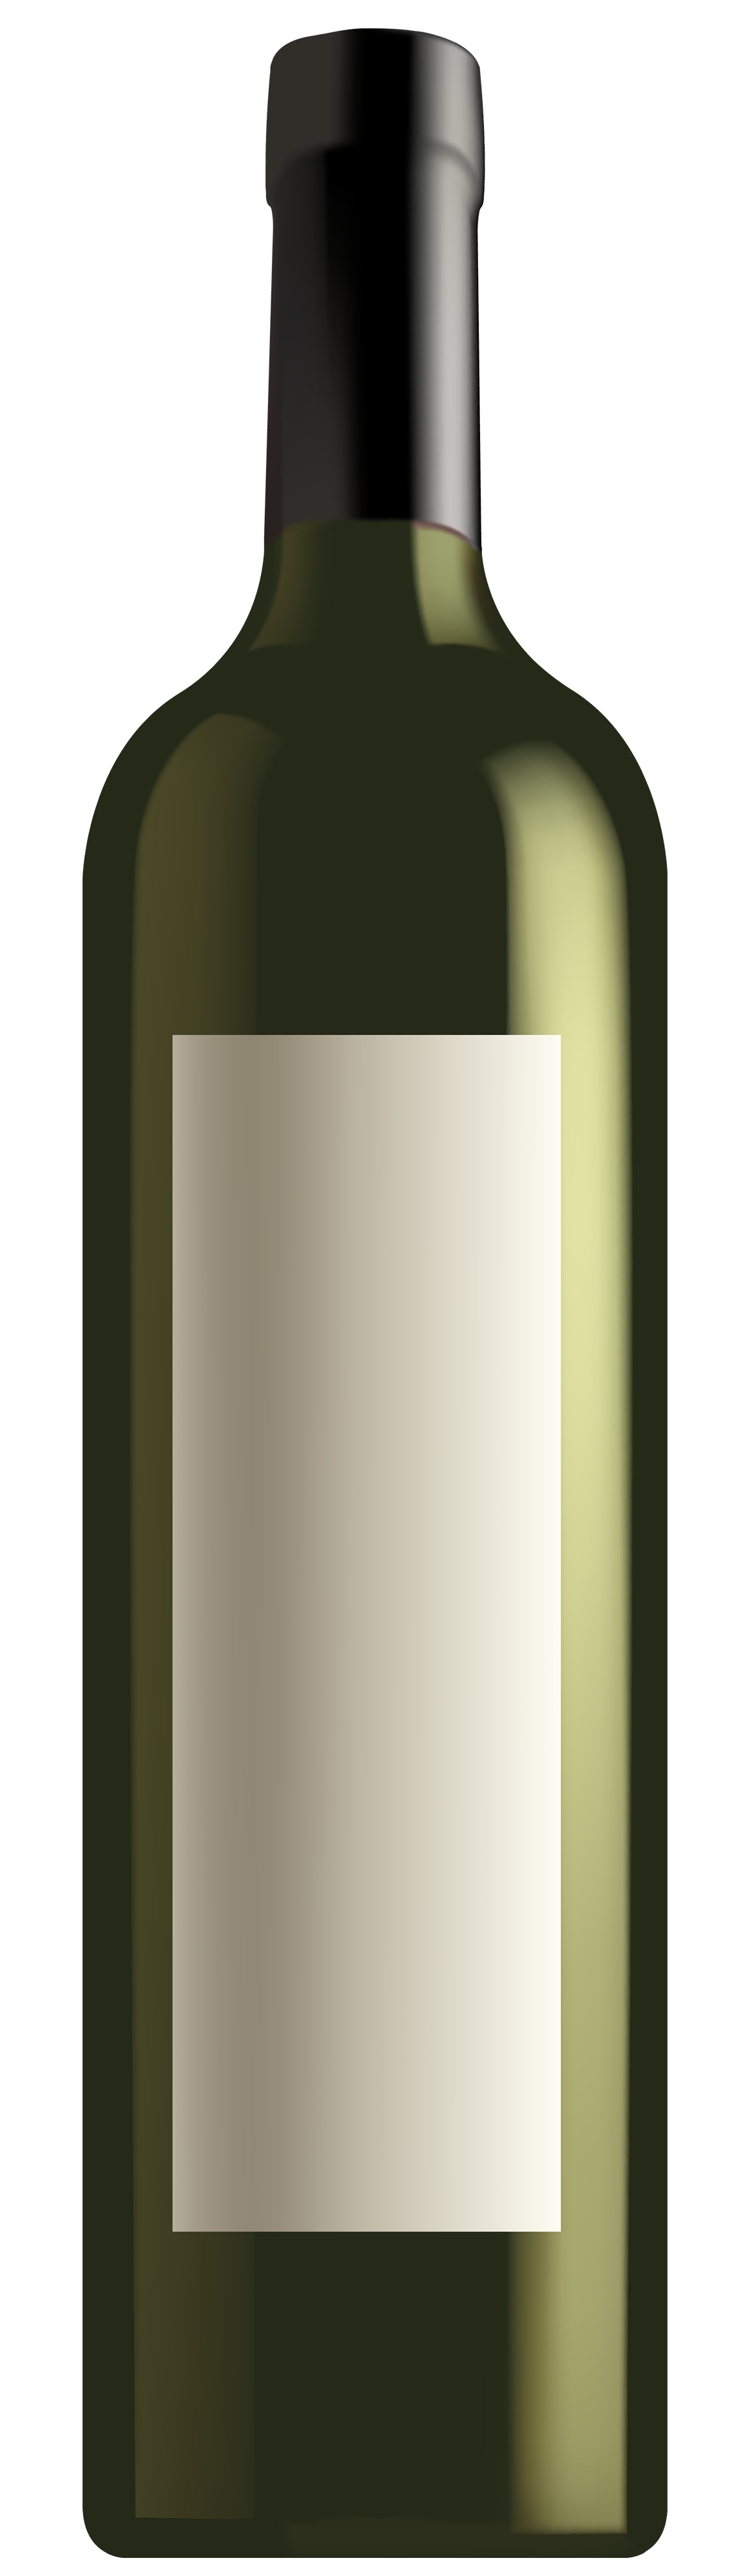 Green wine bottle clipart the clipart